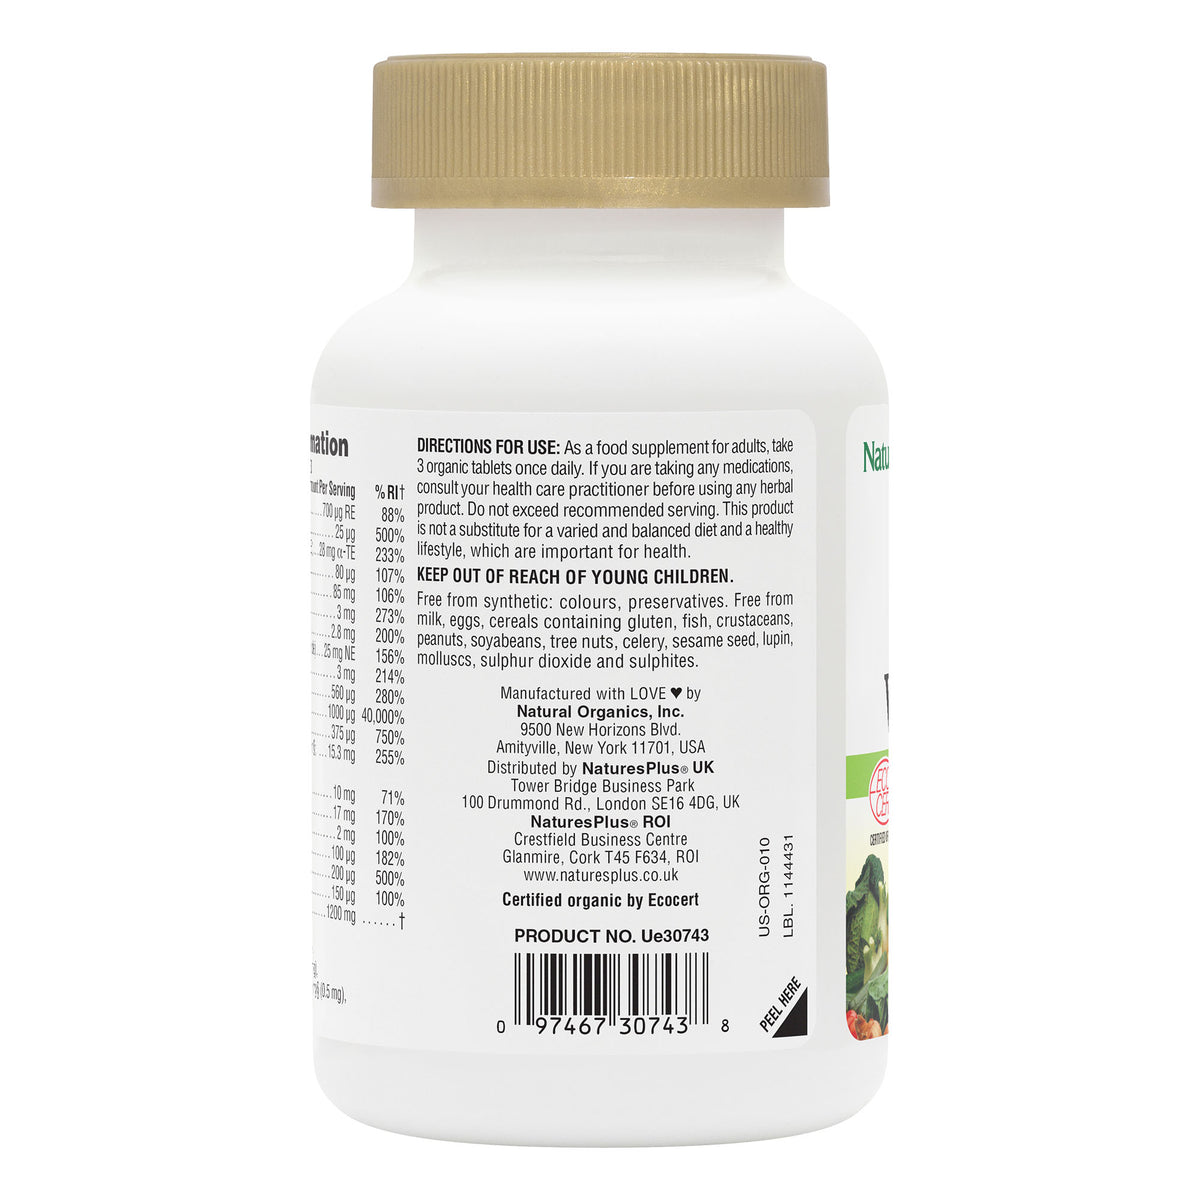 product image of Source of Life® Garden Women's Multivitamin Tablets containing Source of Life® Garden Women's Multivitamin Tablets